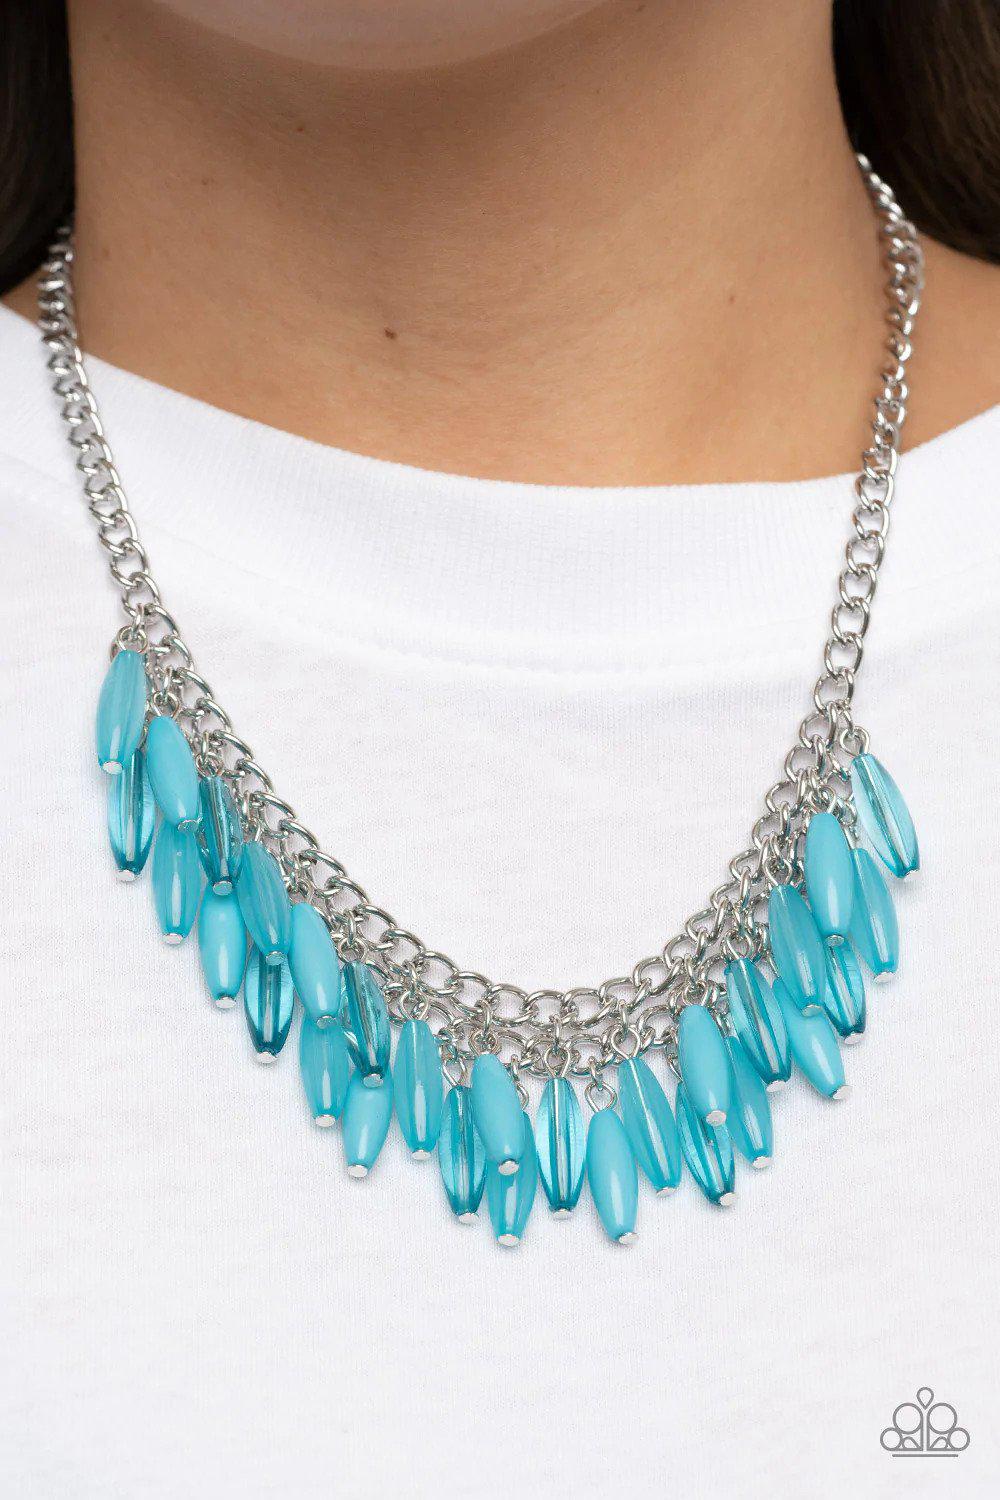 Beach House Hustle Blue Necklace - Paparazzi Accessories- on model - CarasShop.com - $5 Jewelry by Cara Jewels